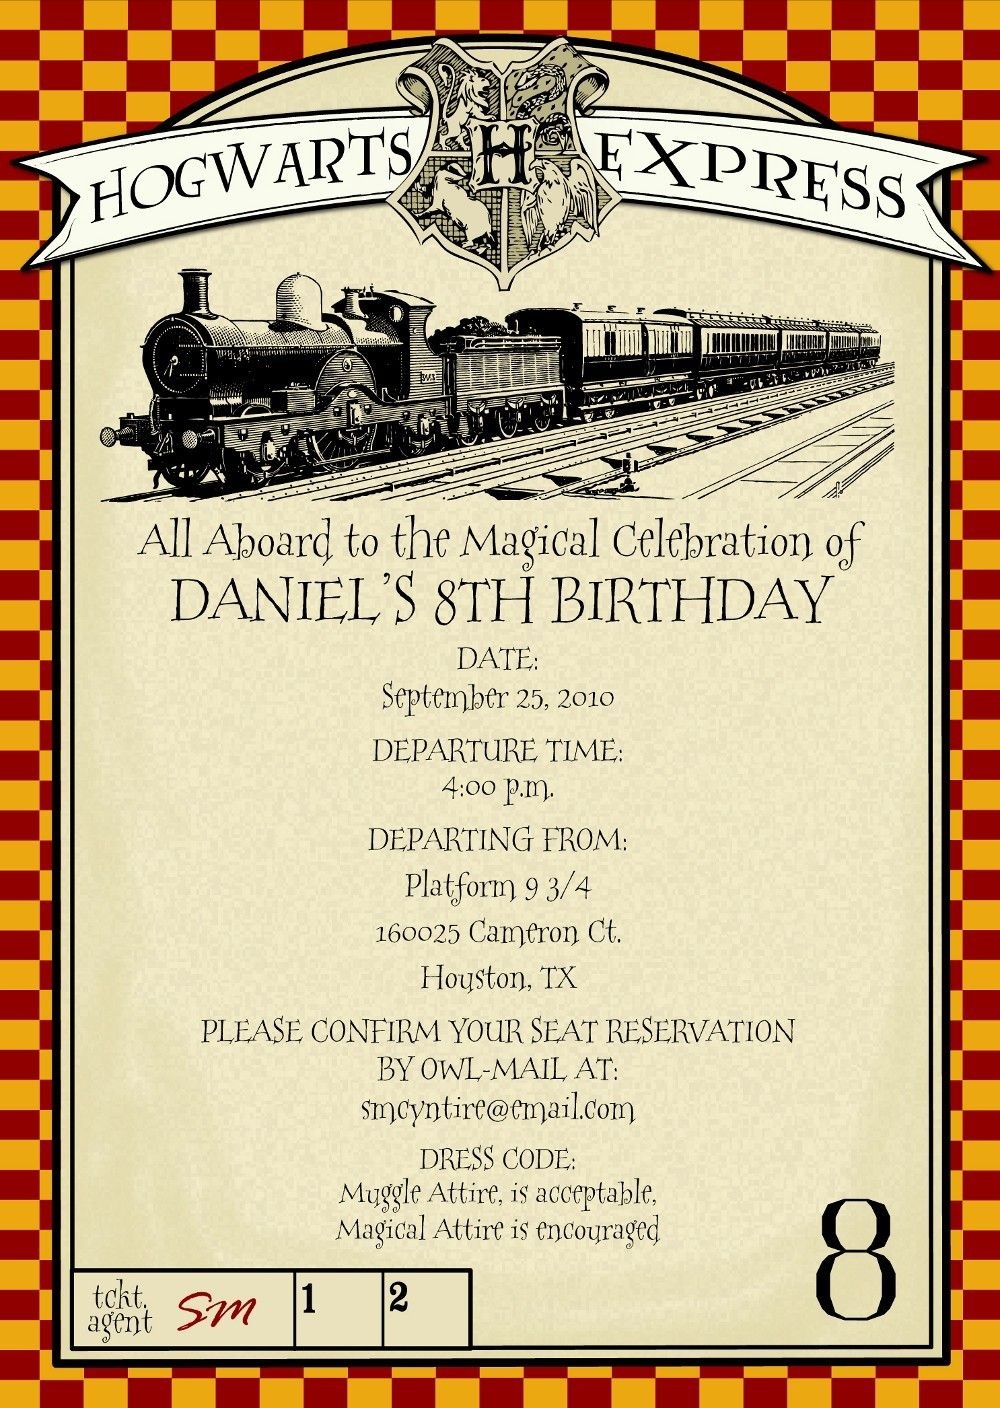 Harry Potter Party Invitations Free Printable | Things I Want - Harry Potter Birthday Invitations Free Printable